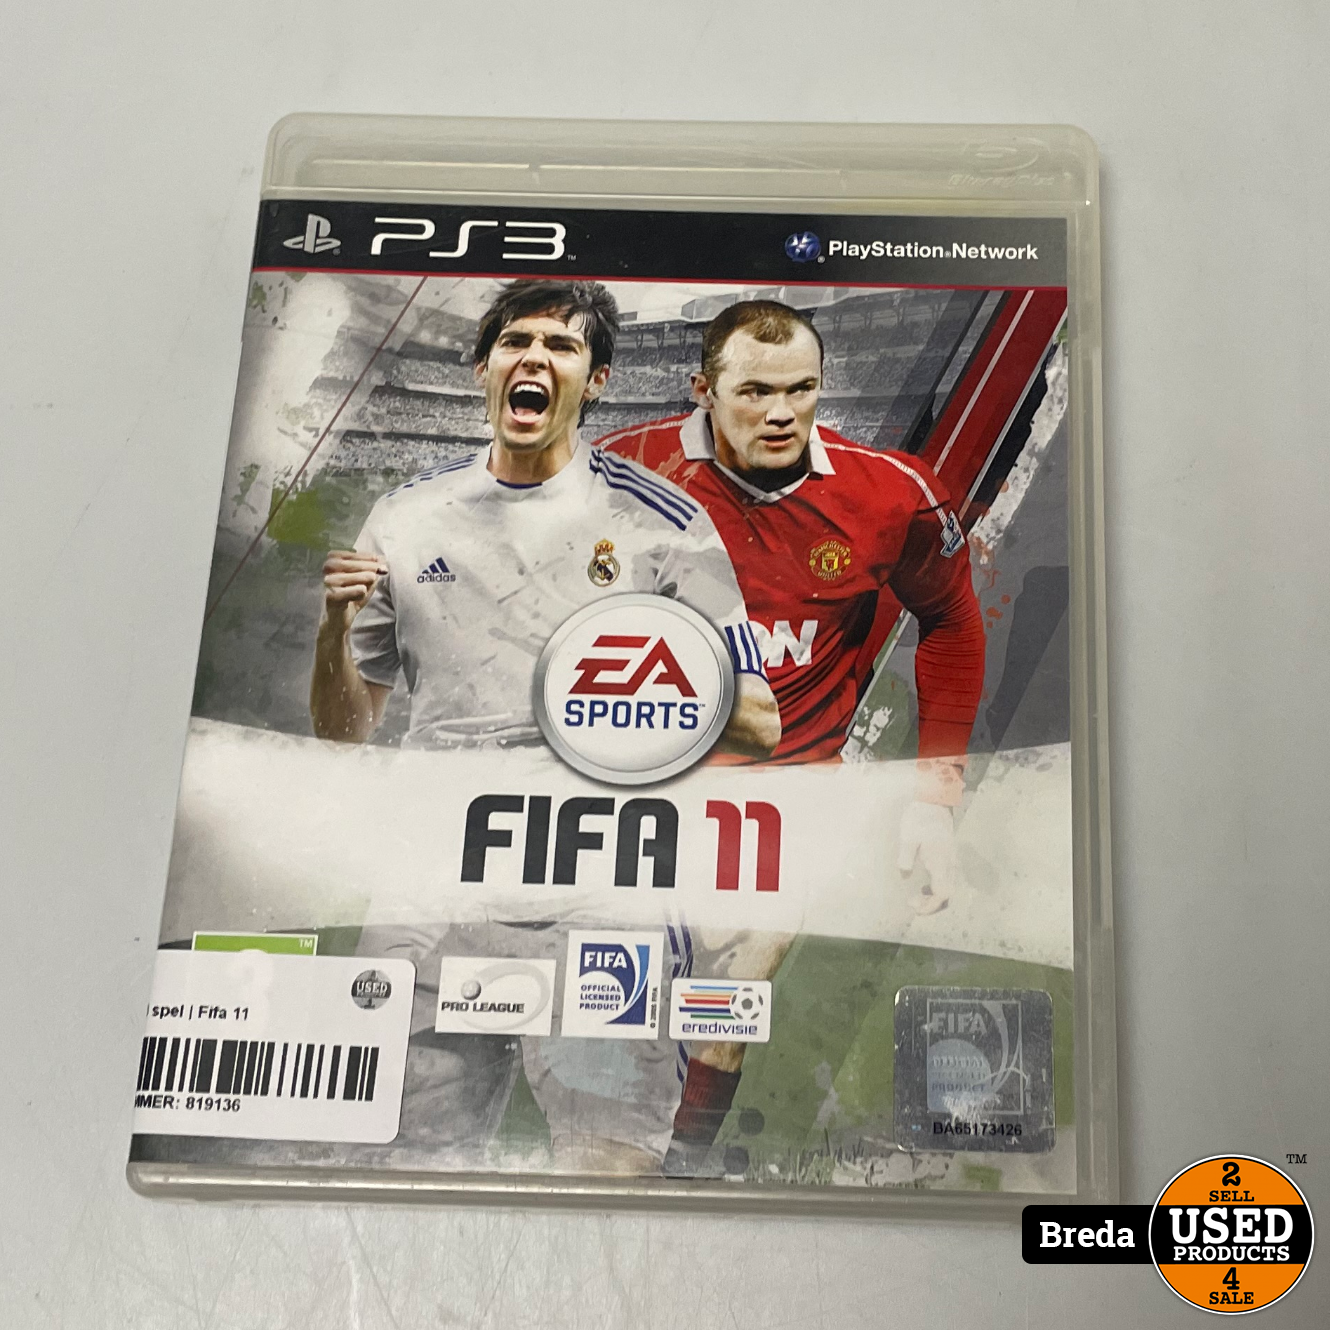 Playstation spel Fifa 11 - Used Products